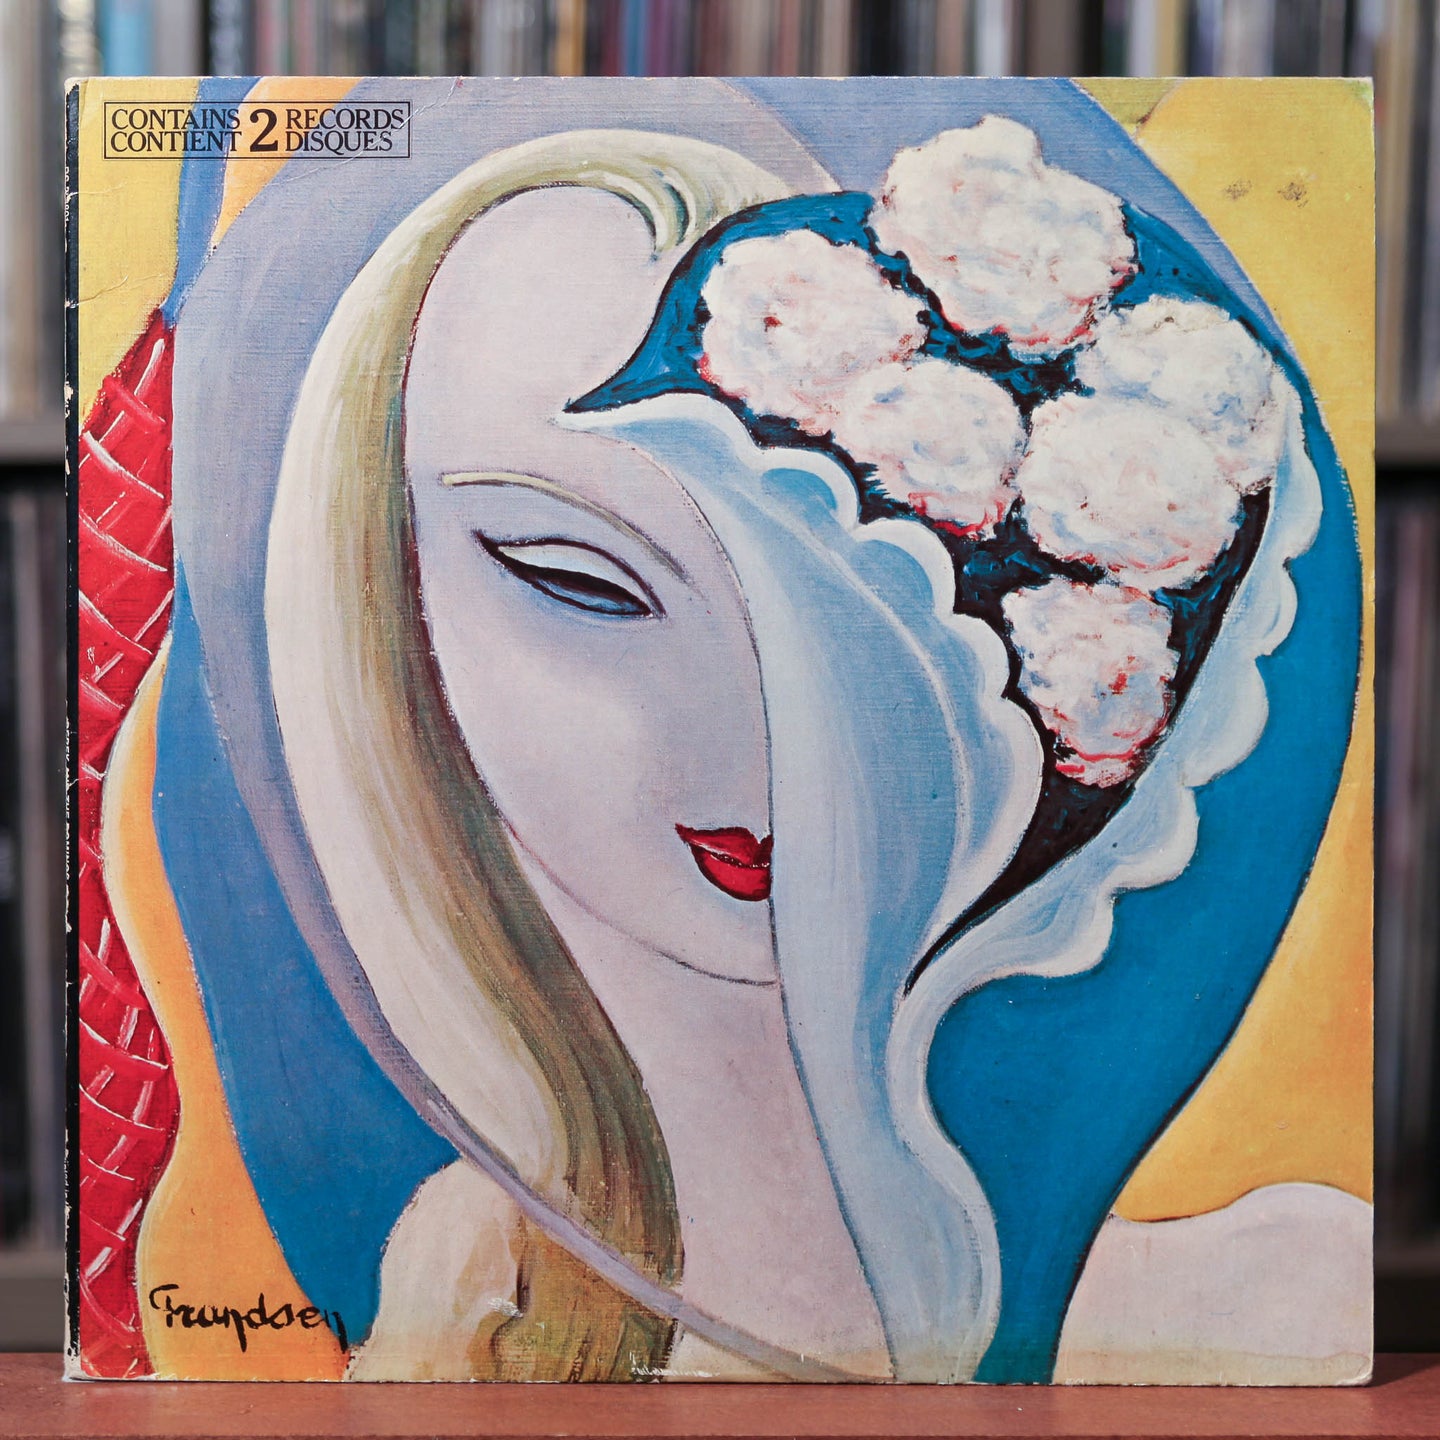 Derek And The Dominos - Layla And Other Assorted Love Songs - 2LP - 1977 RSO, VG+/VG+